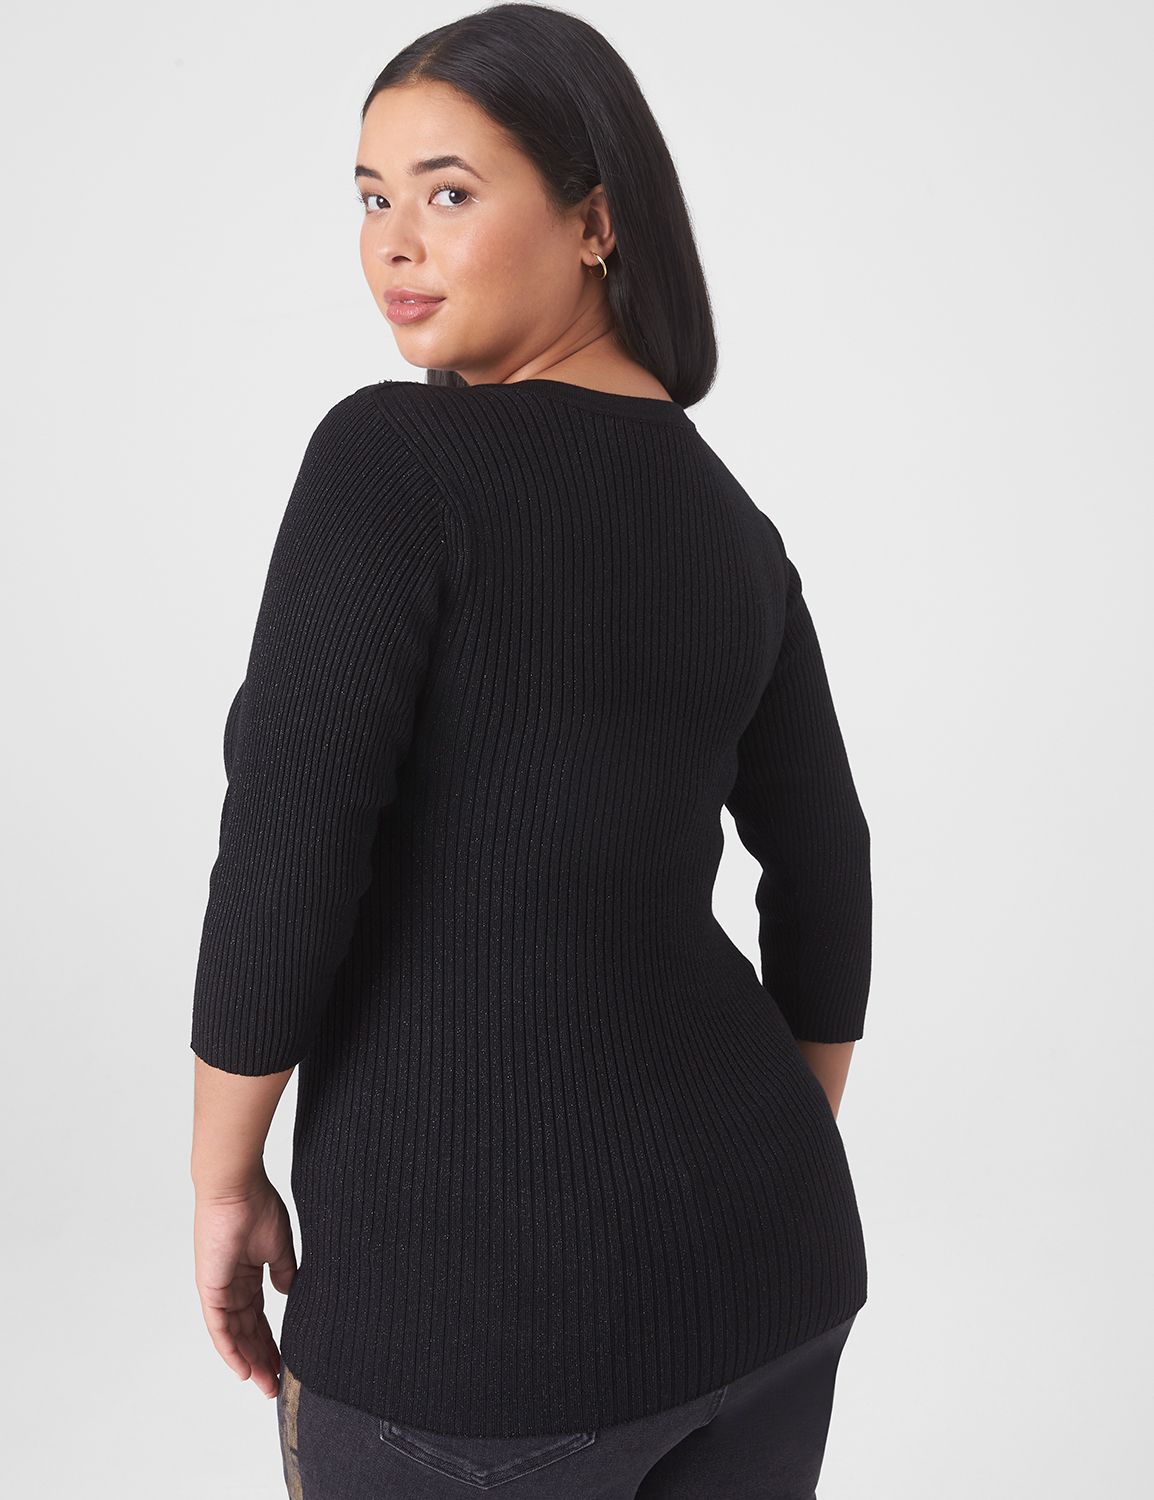 Fitted Three Quarter Sleeve Button | LaneBryant